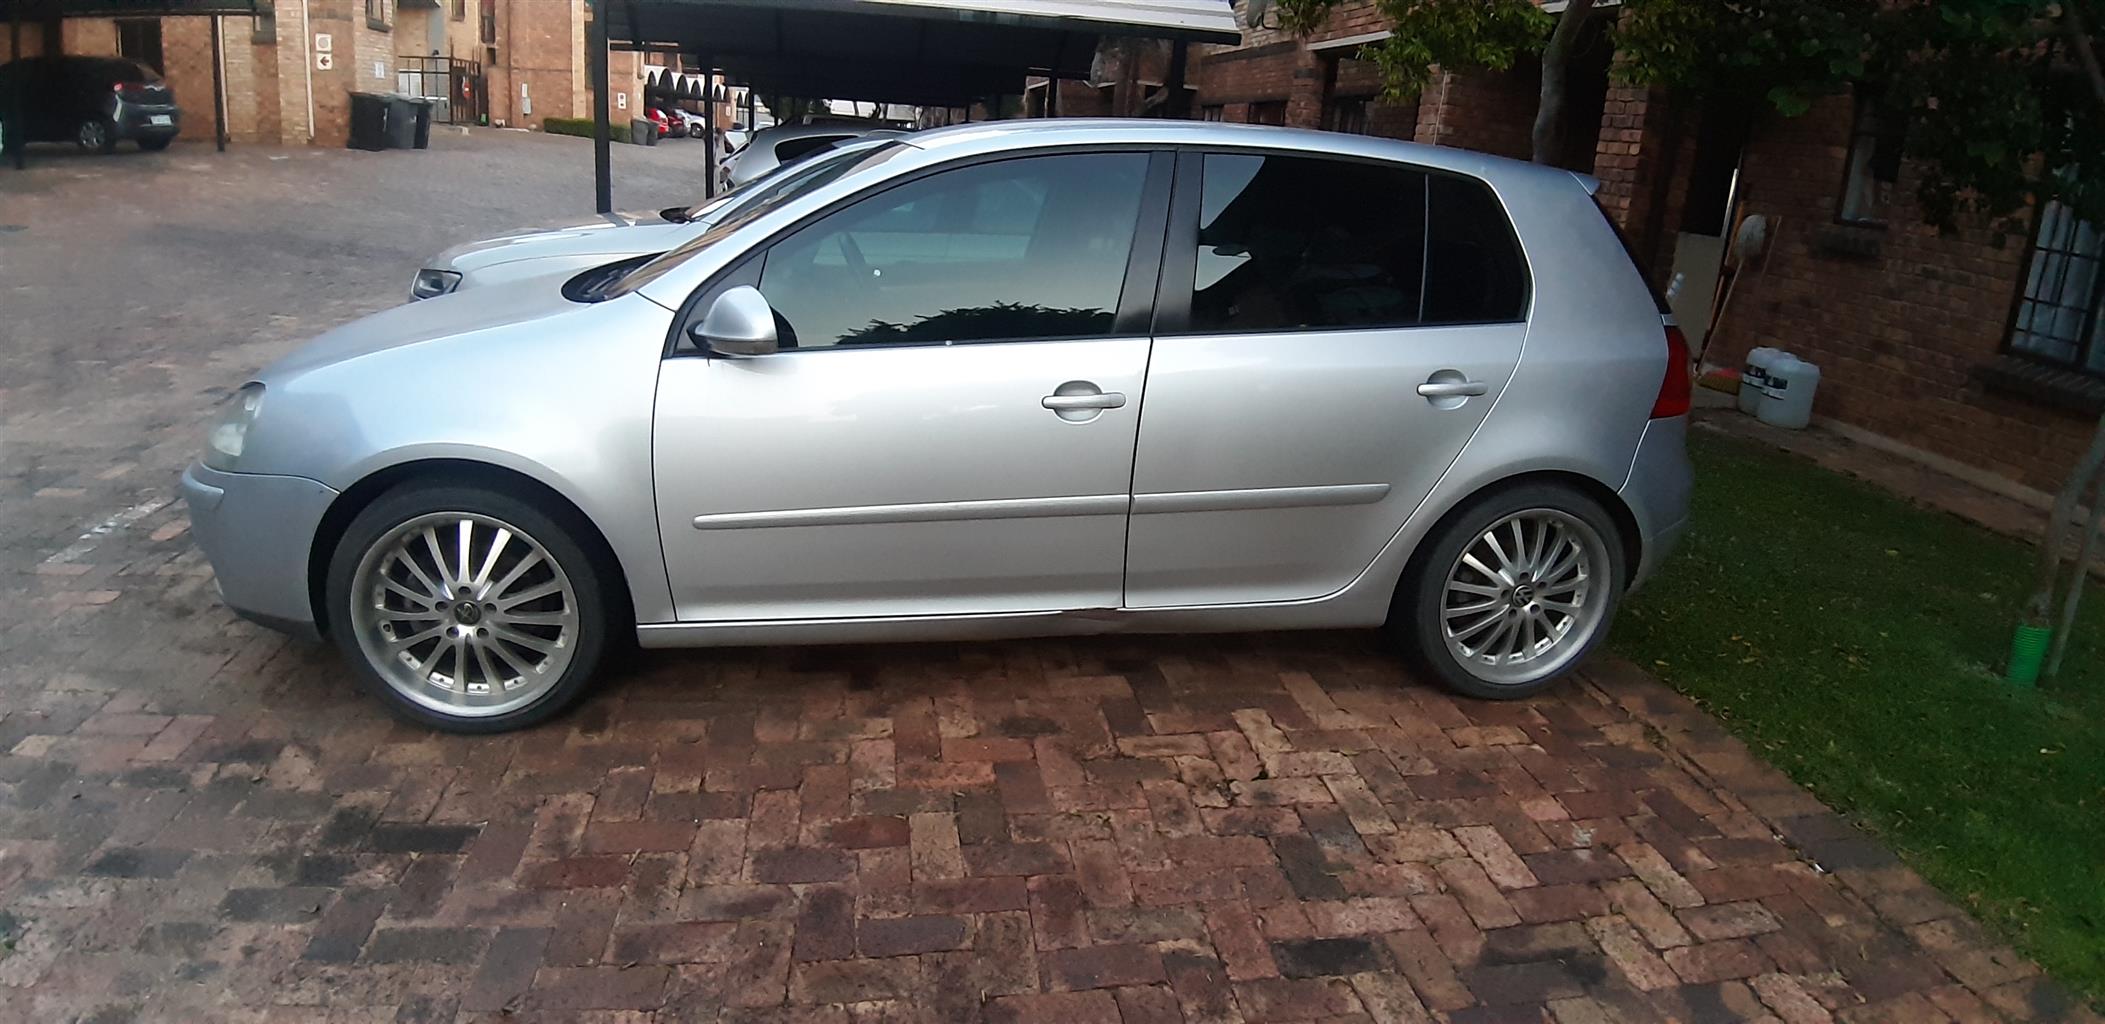 Golf 5 for sale